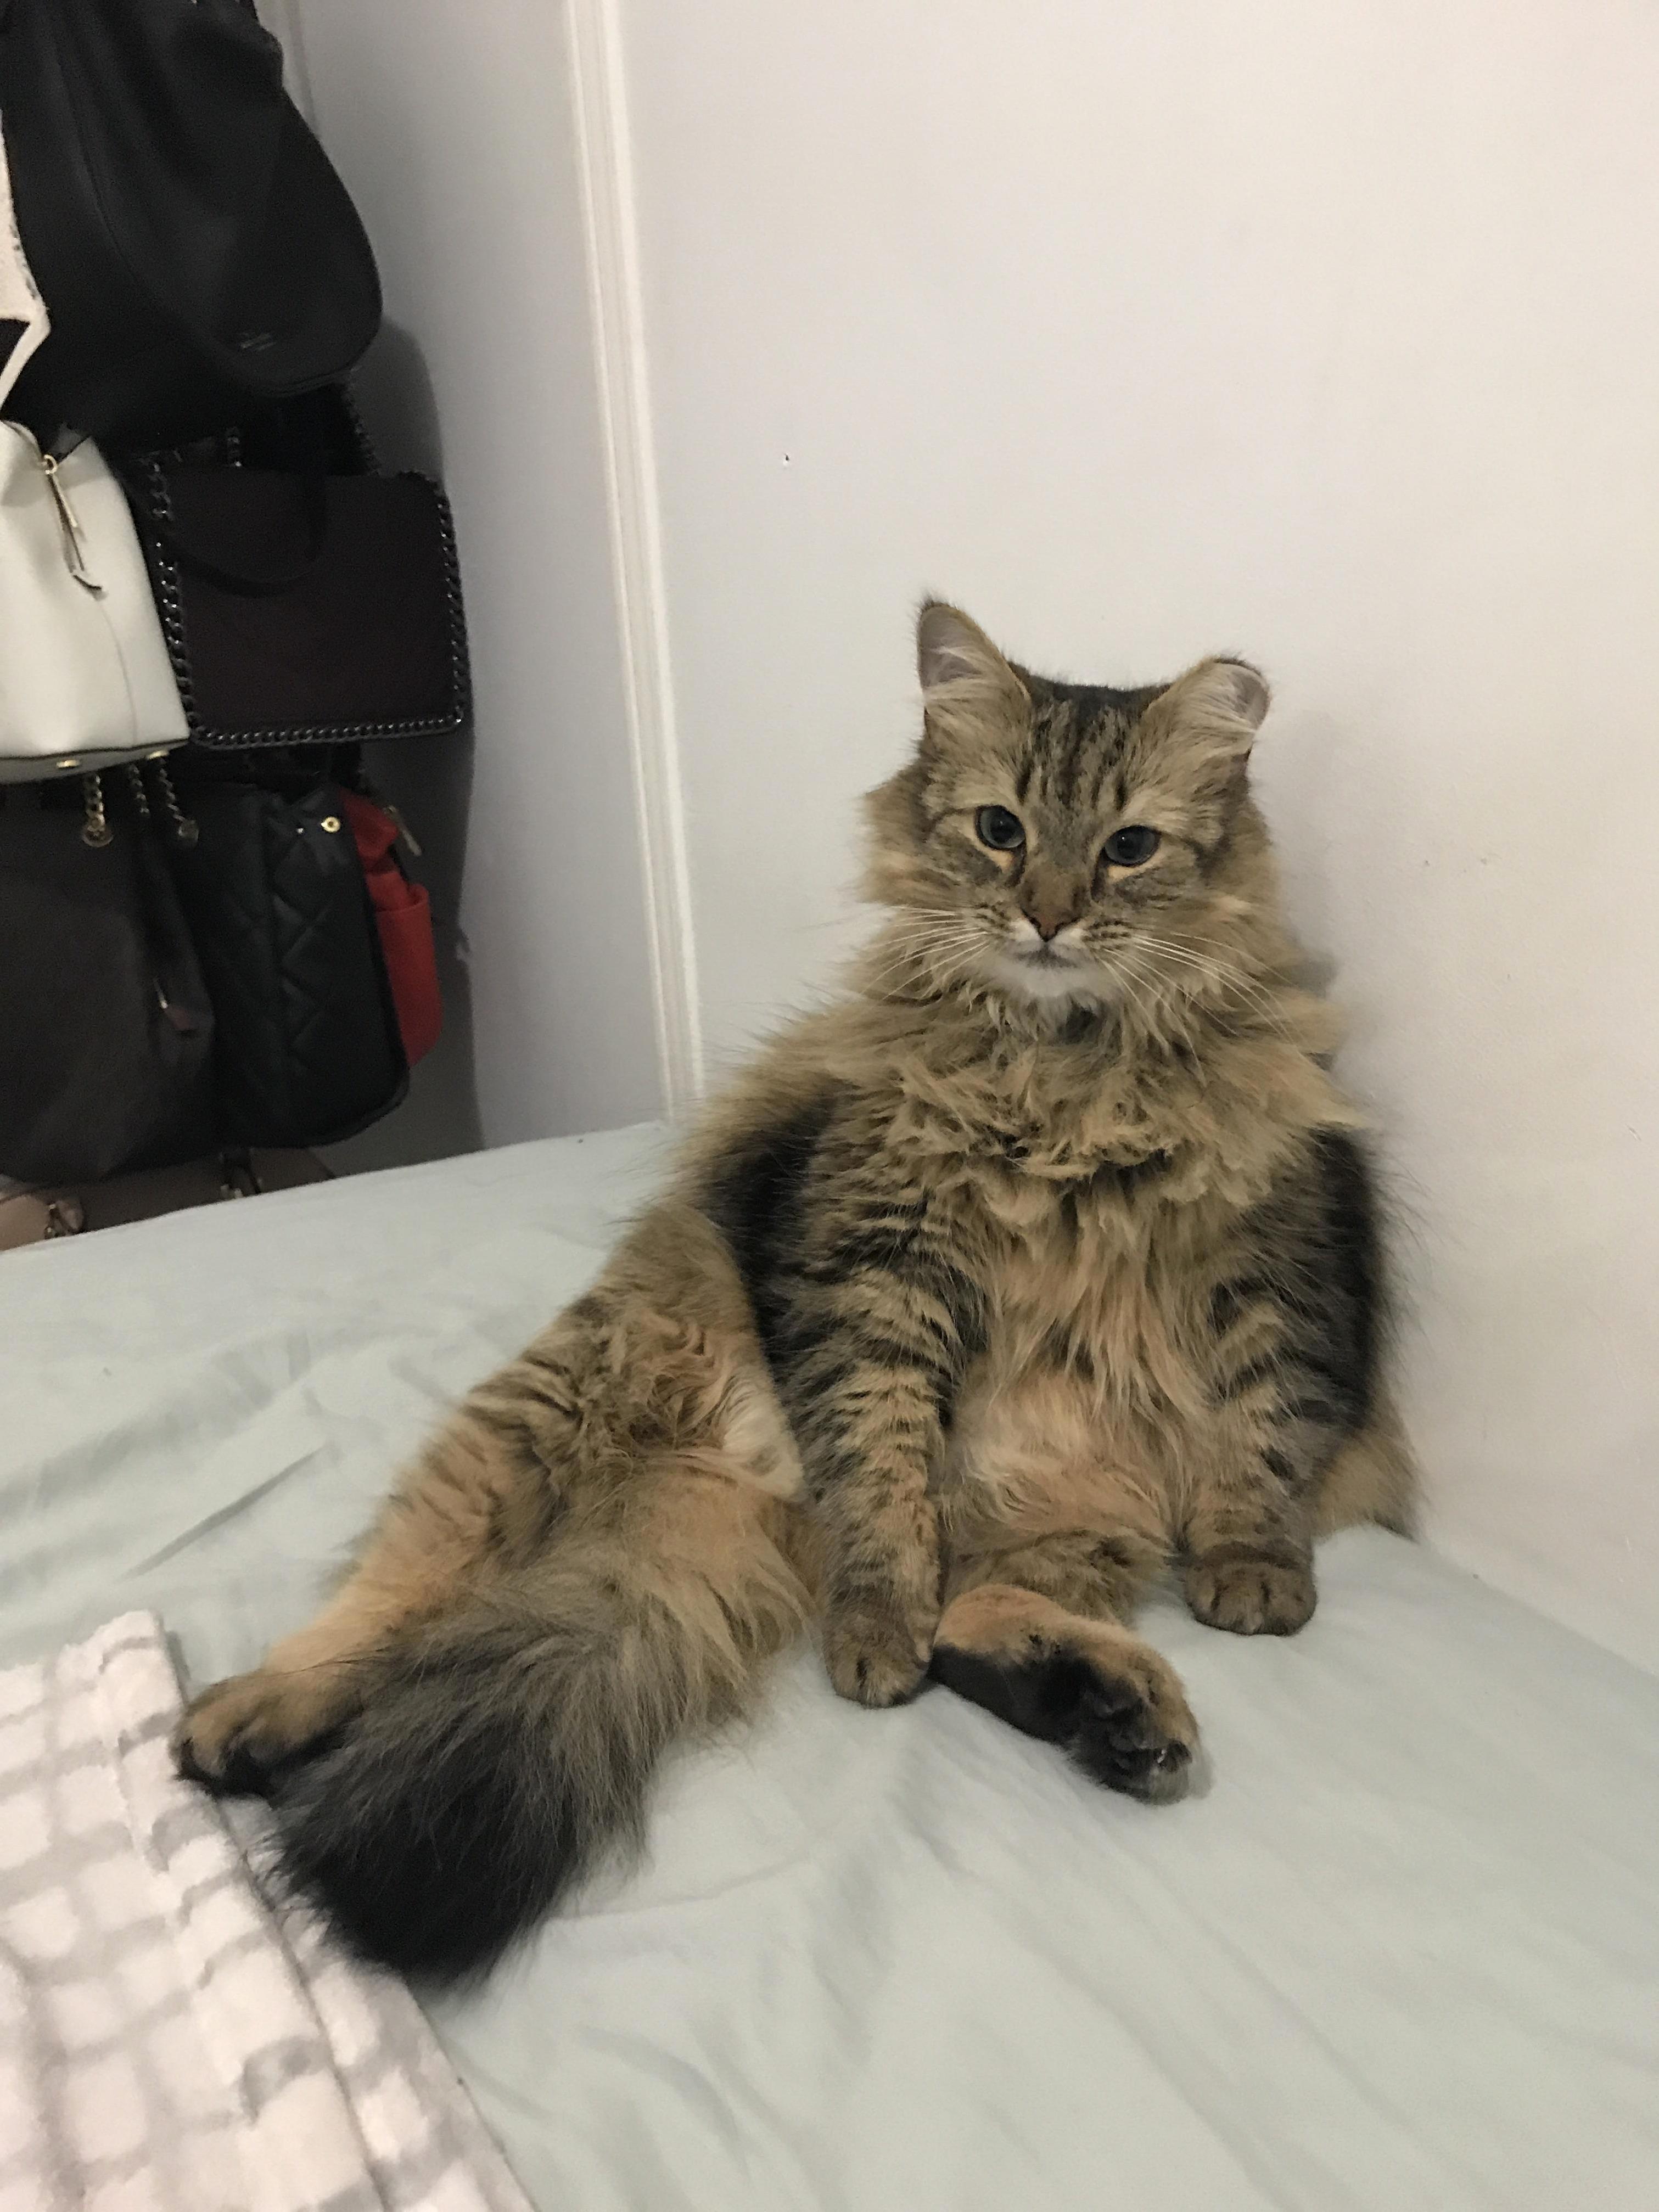 The way my cat sits though